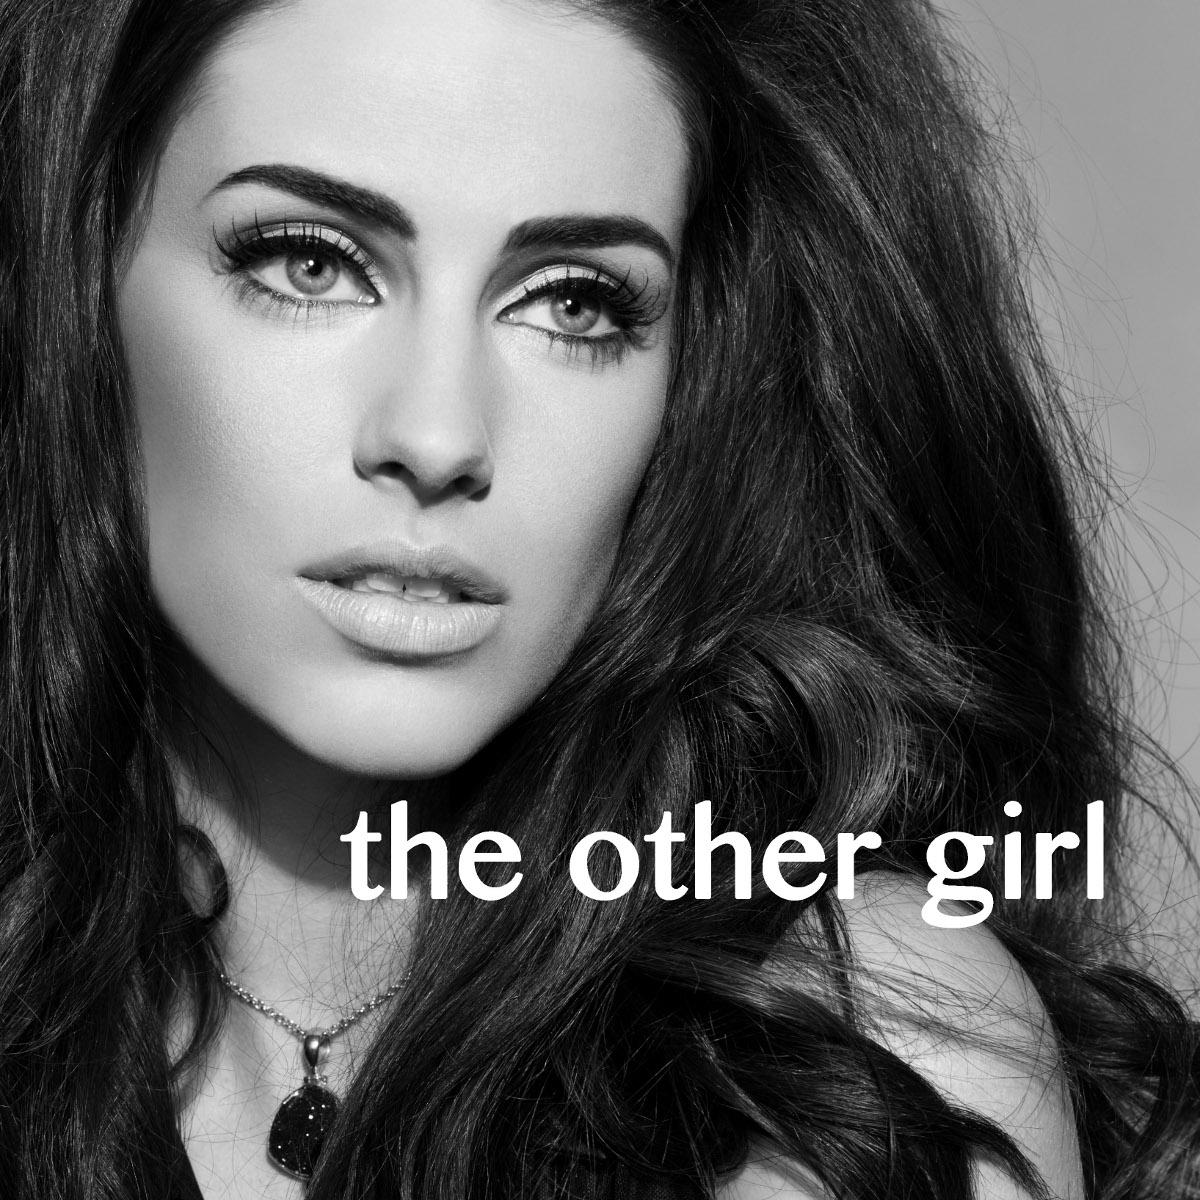 THE OTHER GIRL cover available!